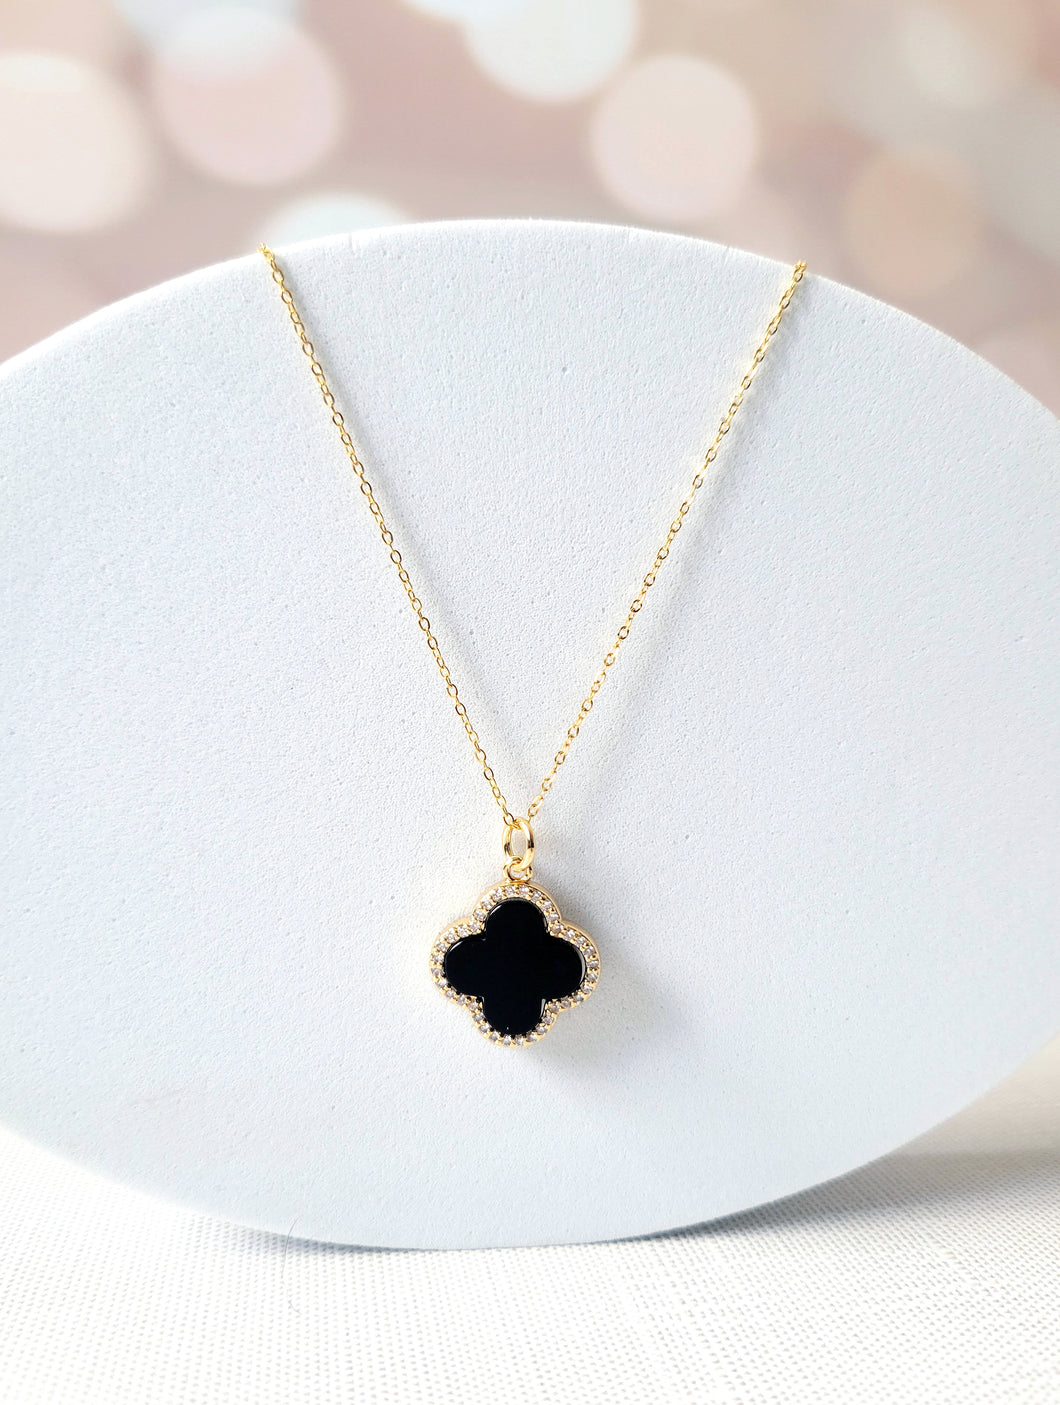 The Raven Clover Necklace